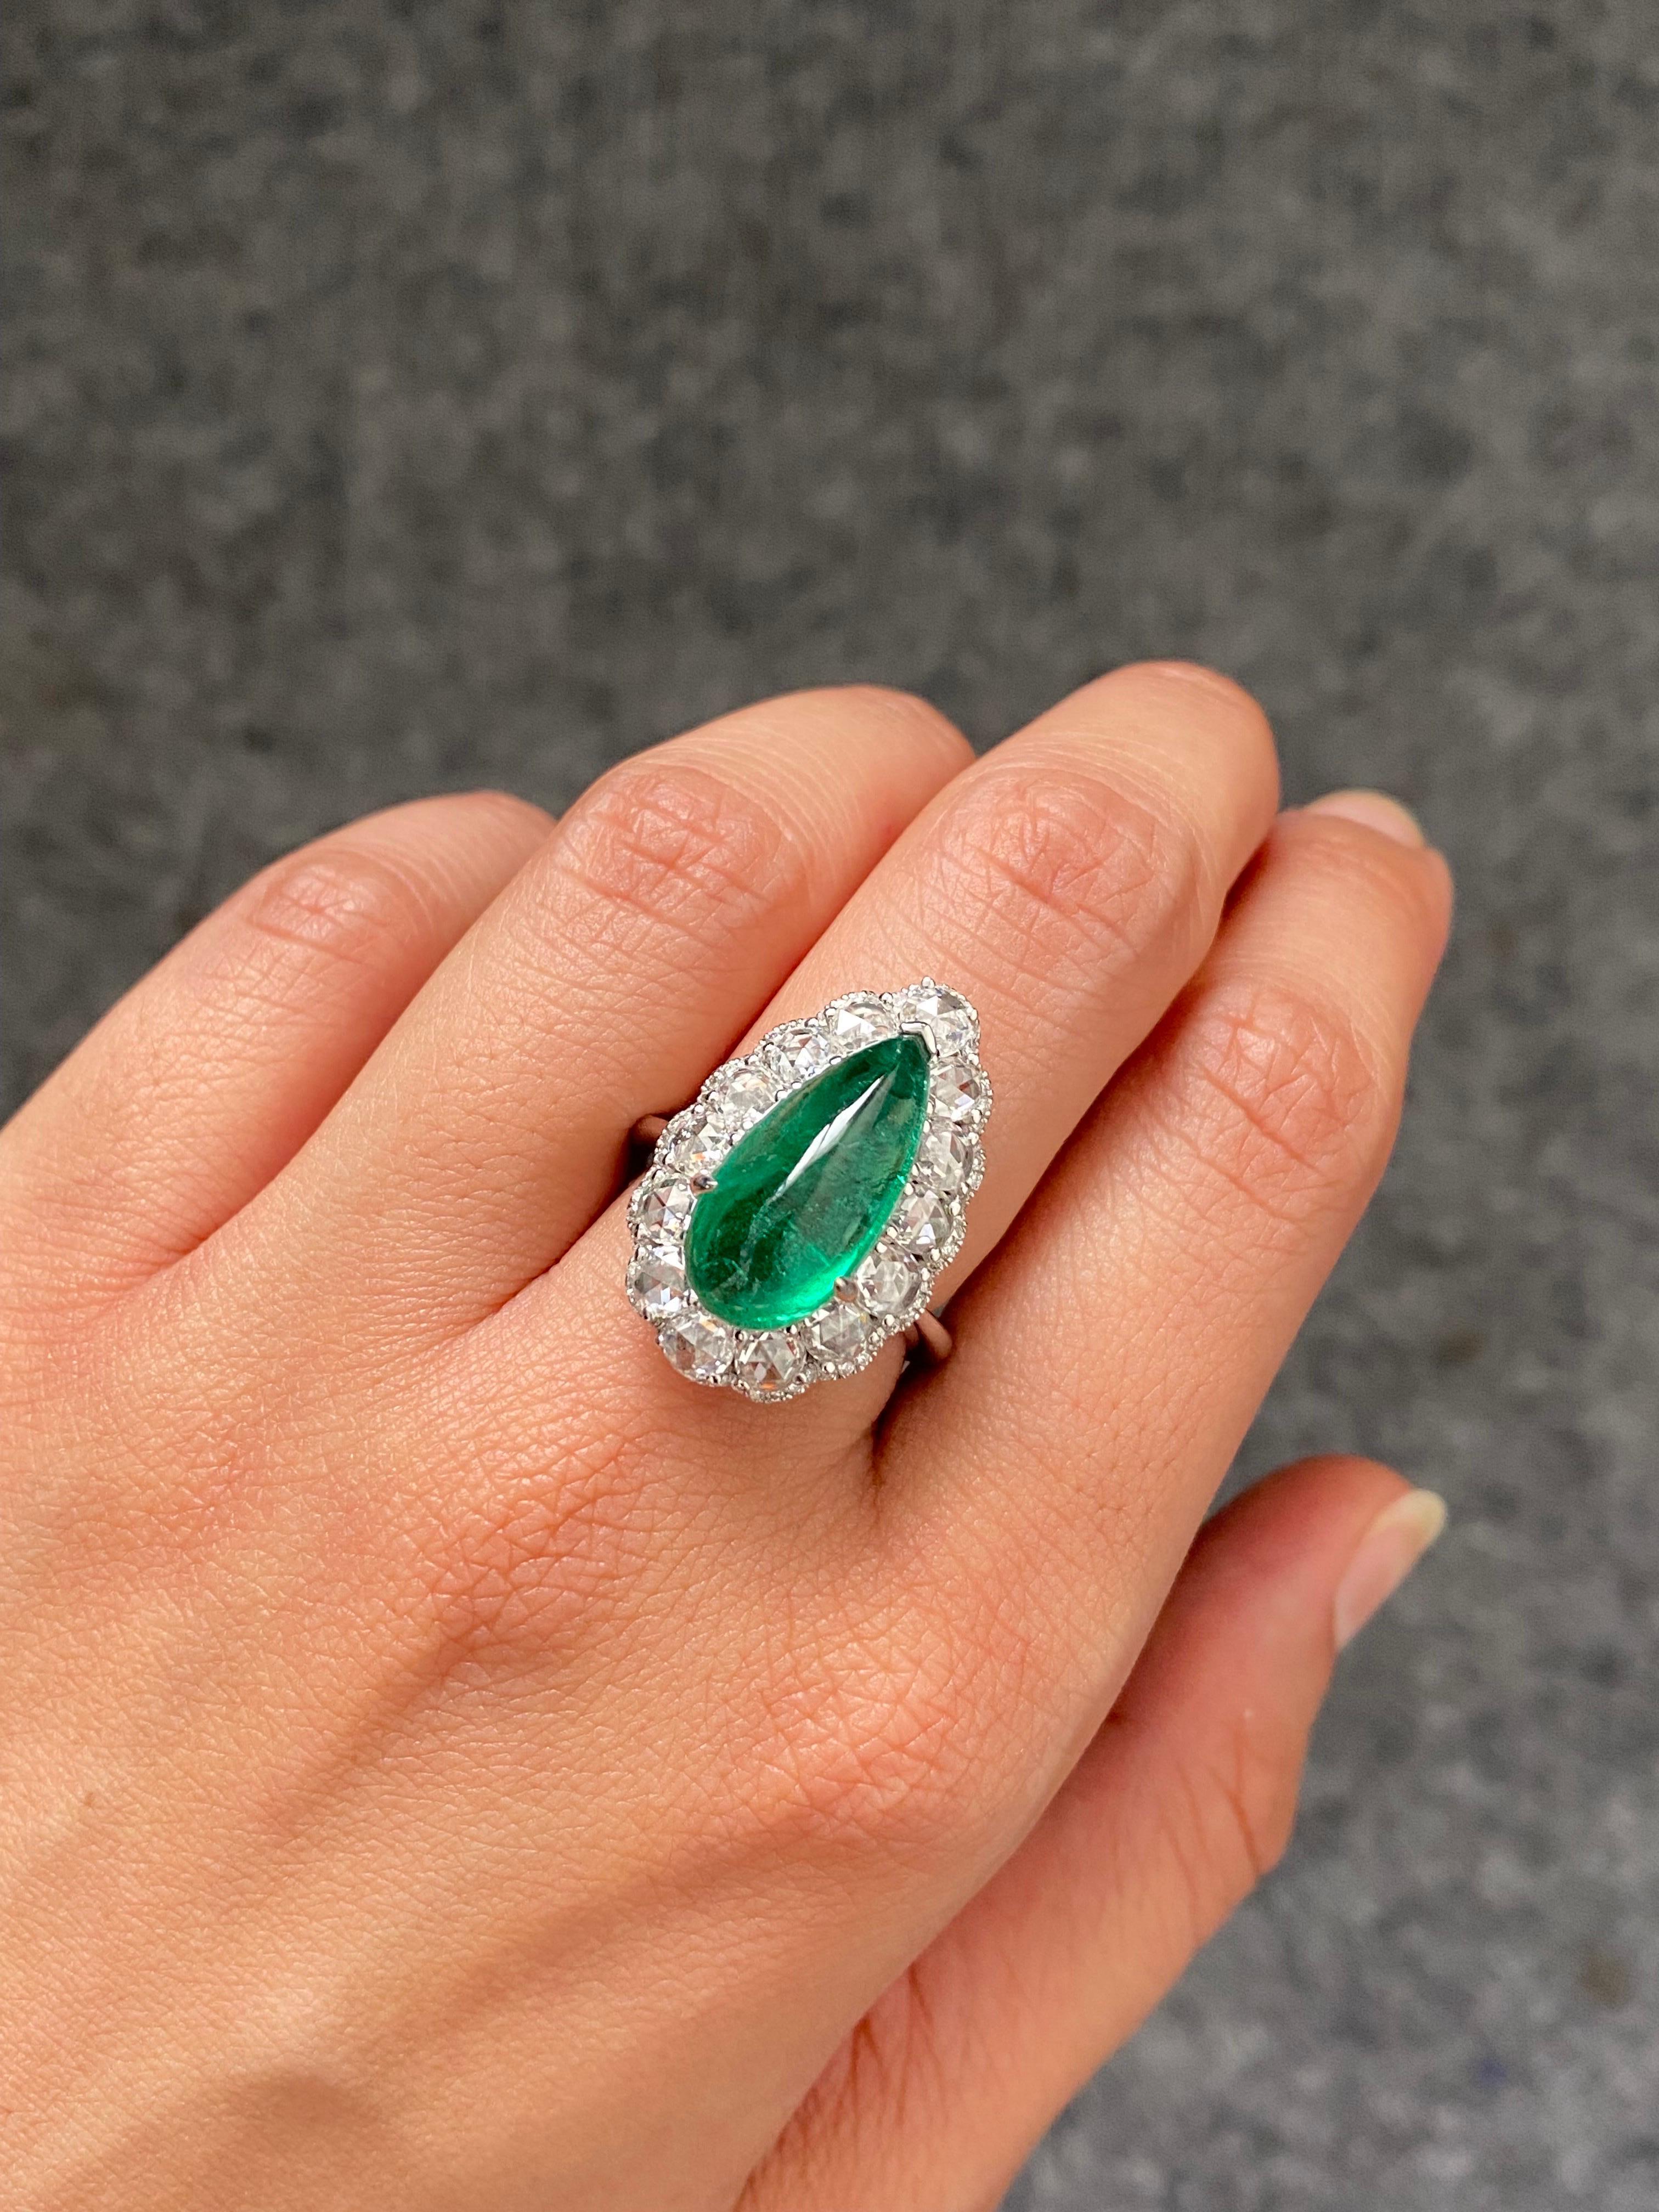 A stunning certified 5.89 carat, Zambian Emerald Cabochon center stone  with 1.92 carat VS quality rose cut Diamonds and 0.27 carat brilliant cut diamonds, set in 18K White Gold. The center stone has a beautiful luster, and vivid green color and